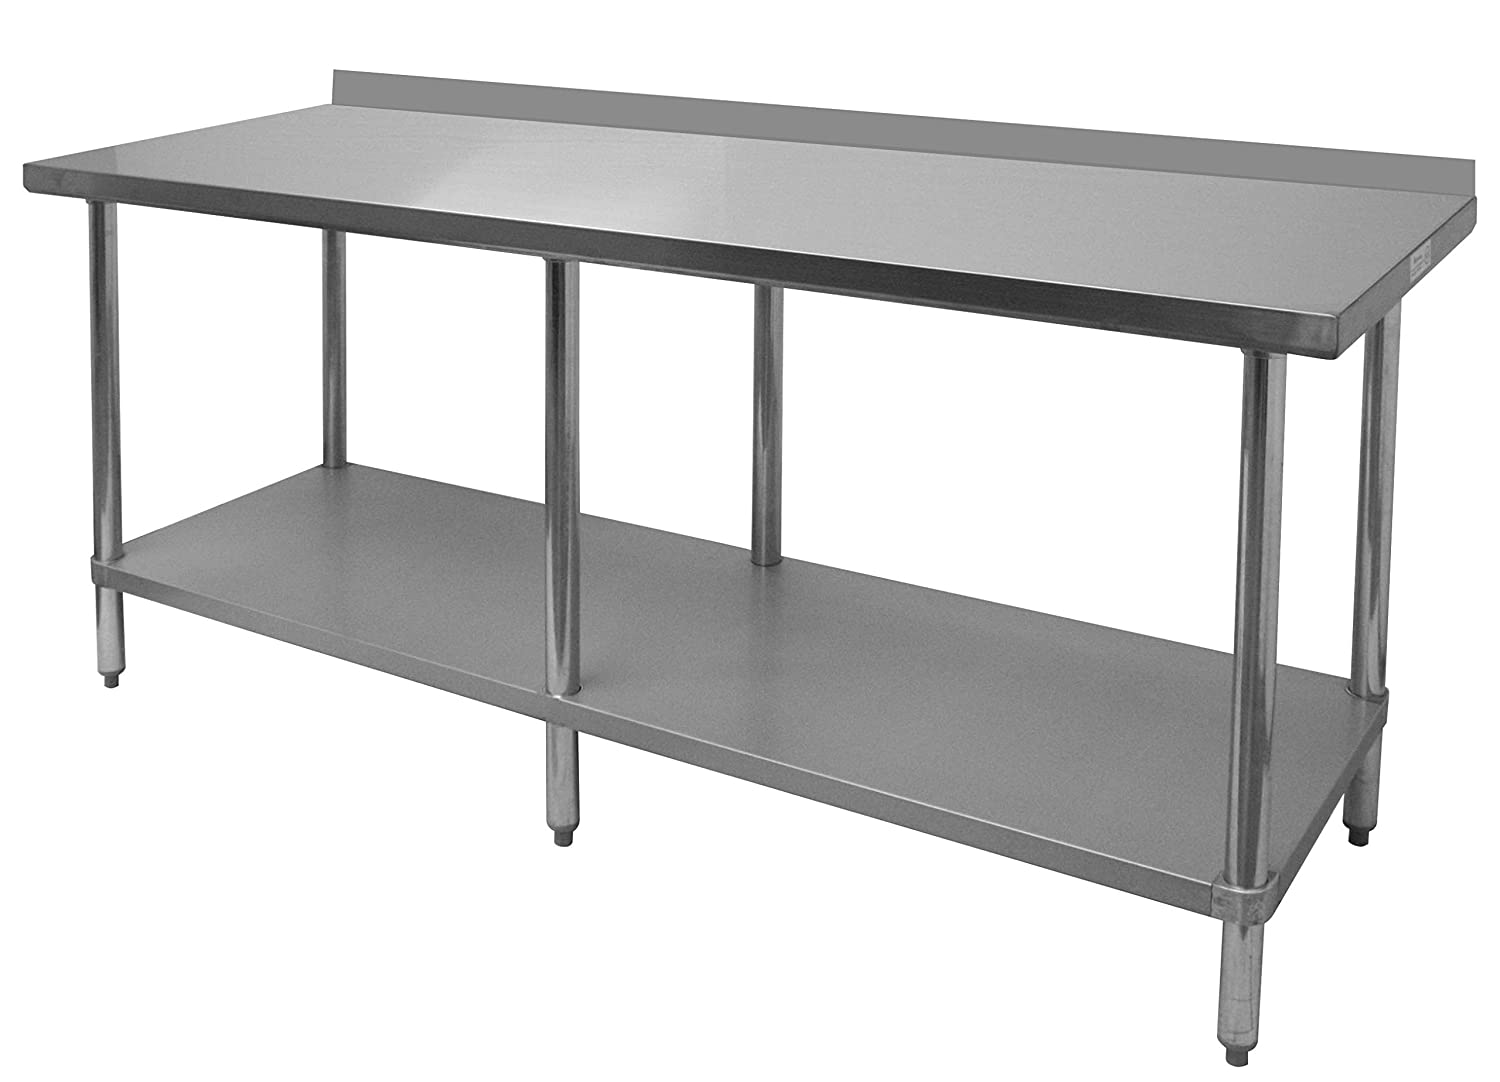 GSW Commercial Work Table with Stainless Steel Top, 1 Galvanized Undershelf, 1-1/2" Backsplash & Adjustable Bullet Feet (24"D x 72"L x 35"H)